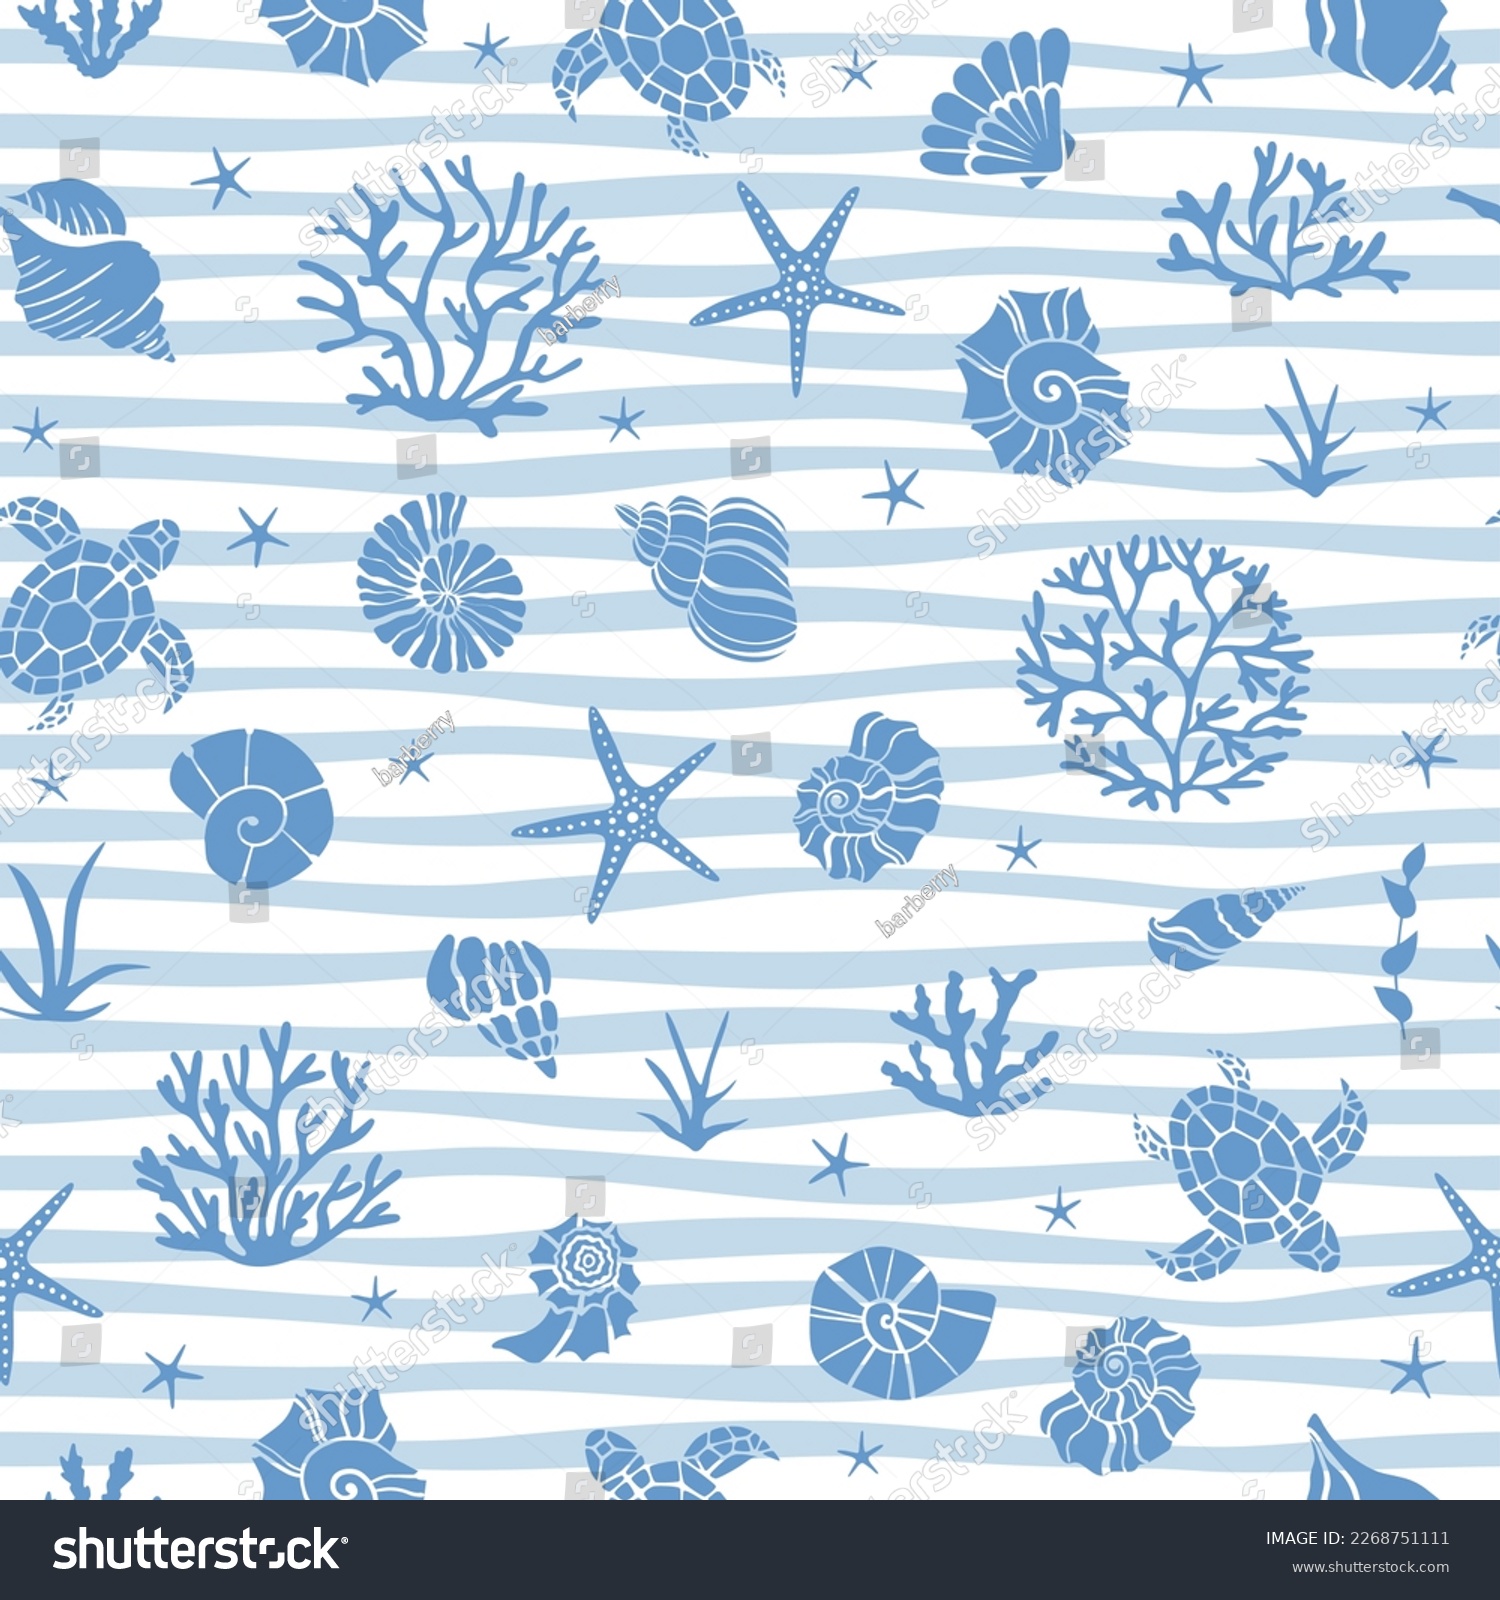 Blue seamless pattern with underwater life objects - seashells, starfish, corals, algae and sea turtles. #2268751111